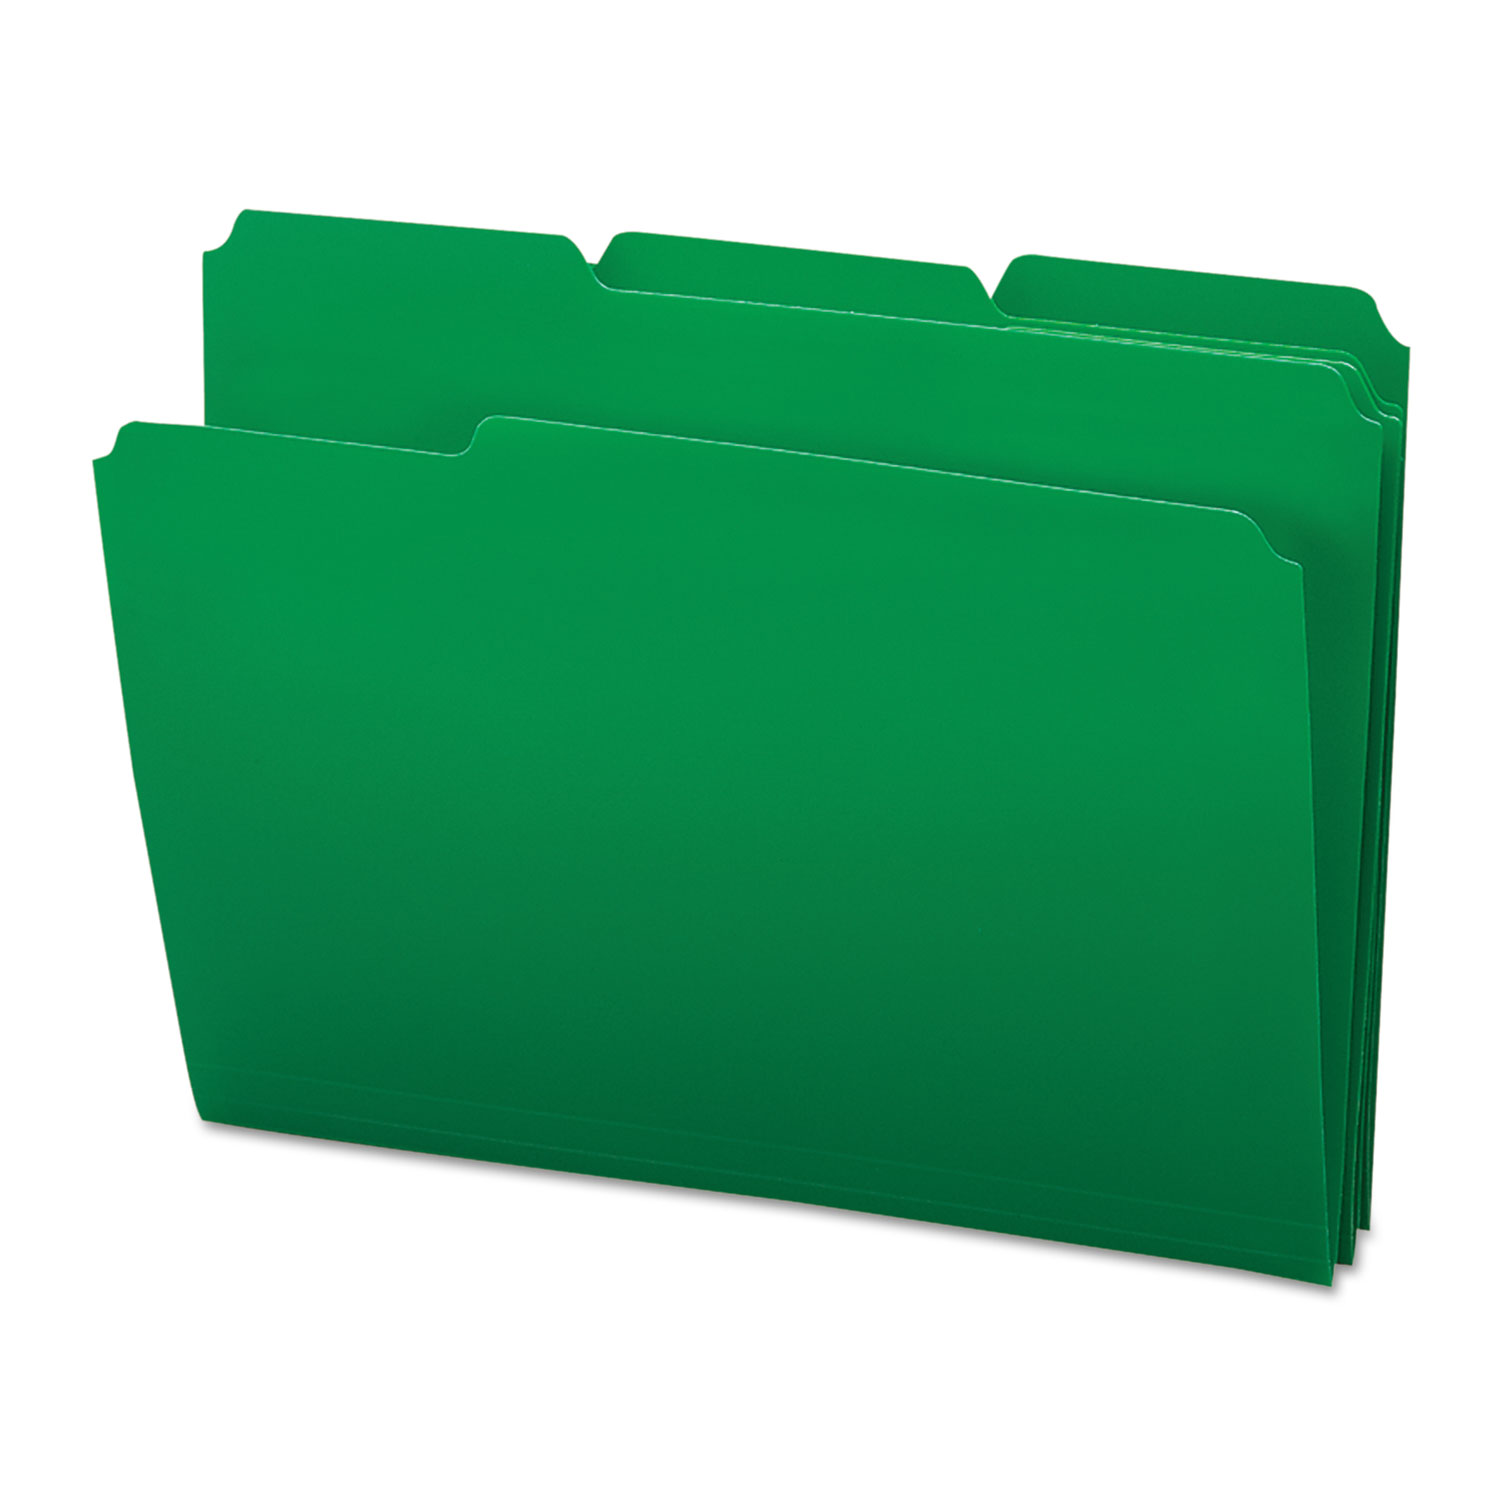  Smead 10502 Top Tab Poly Colored File Folders, 1/3-Cut Tabs, Letter Size, Green, 24/Box (SMD10502) 